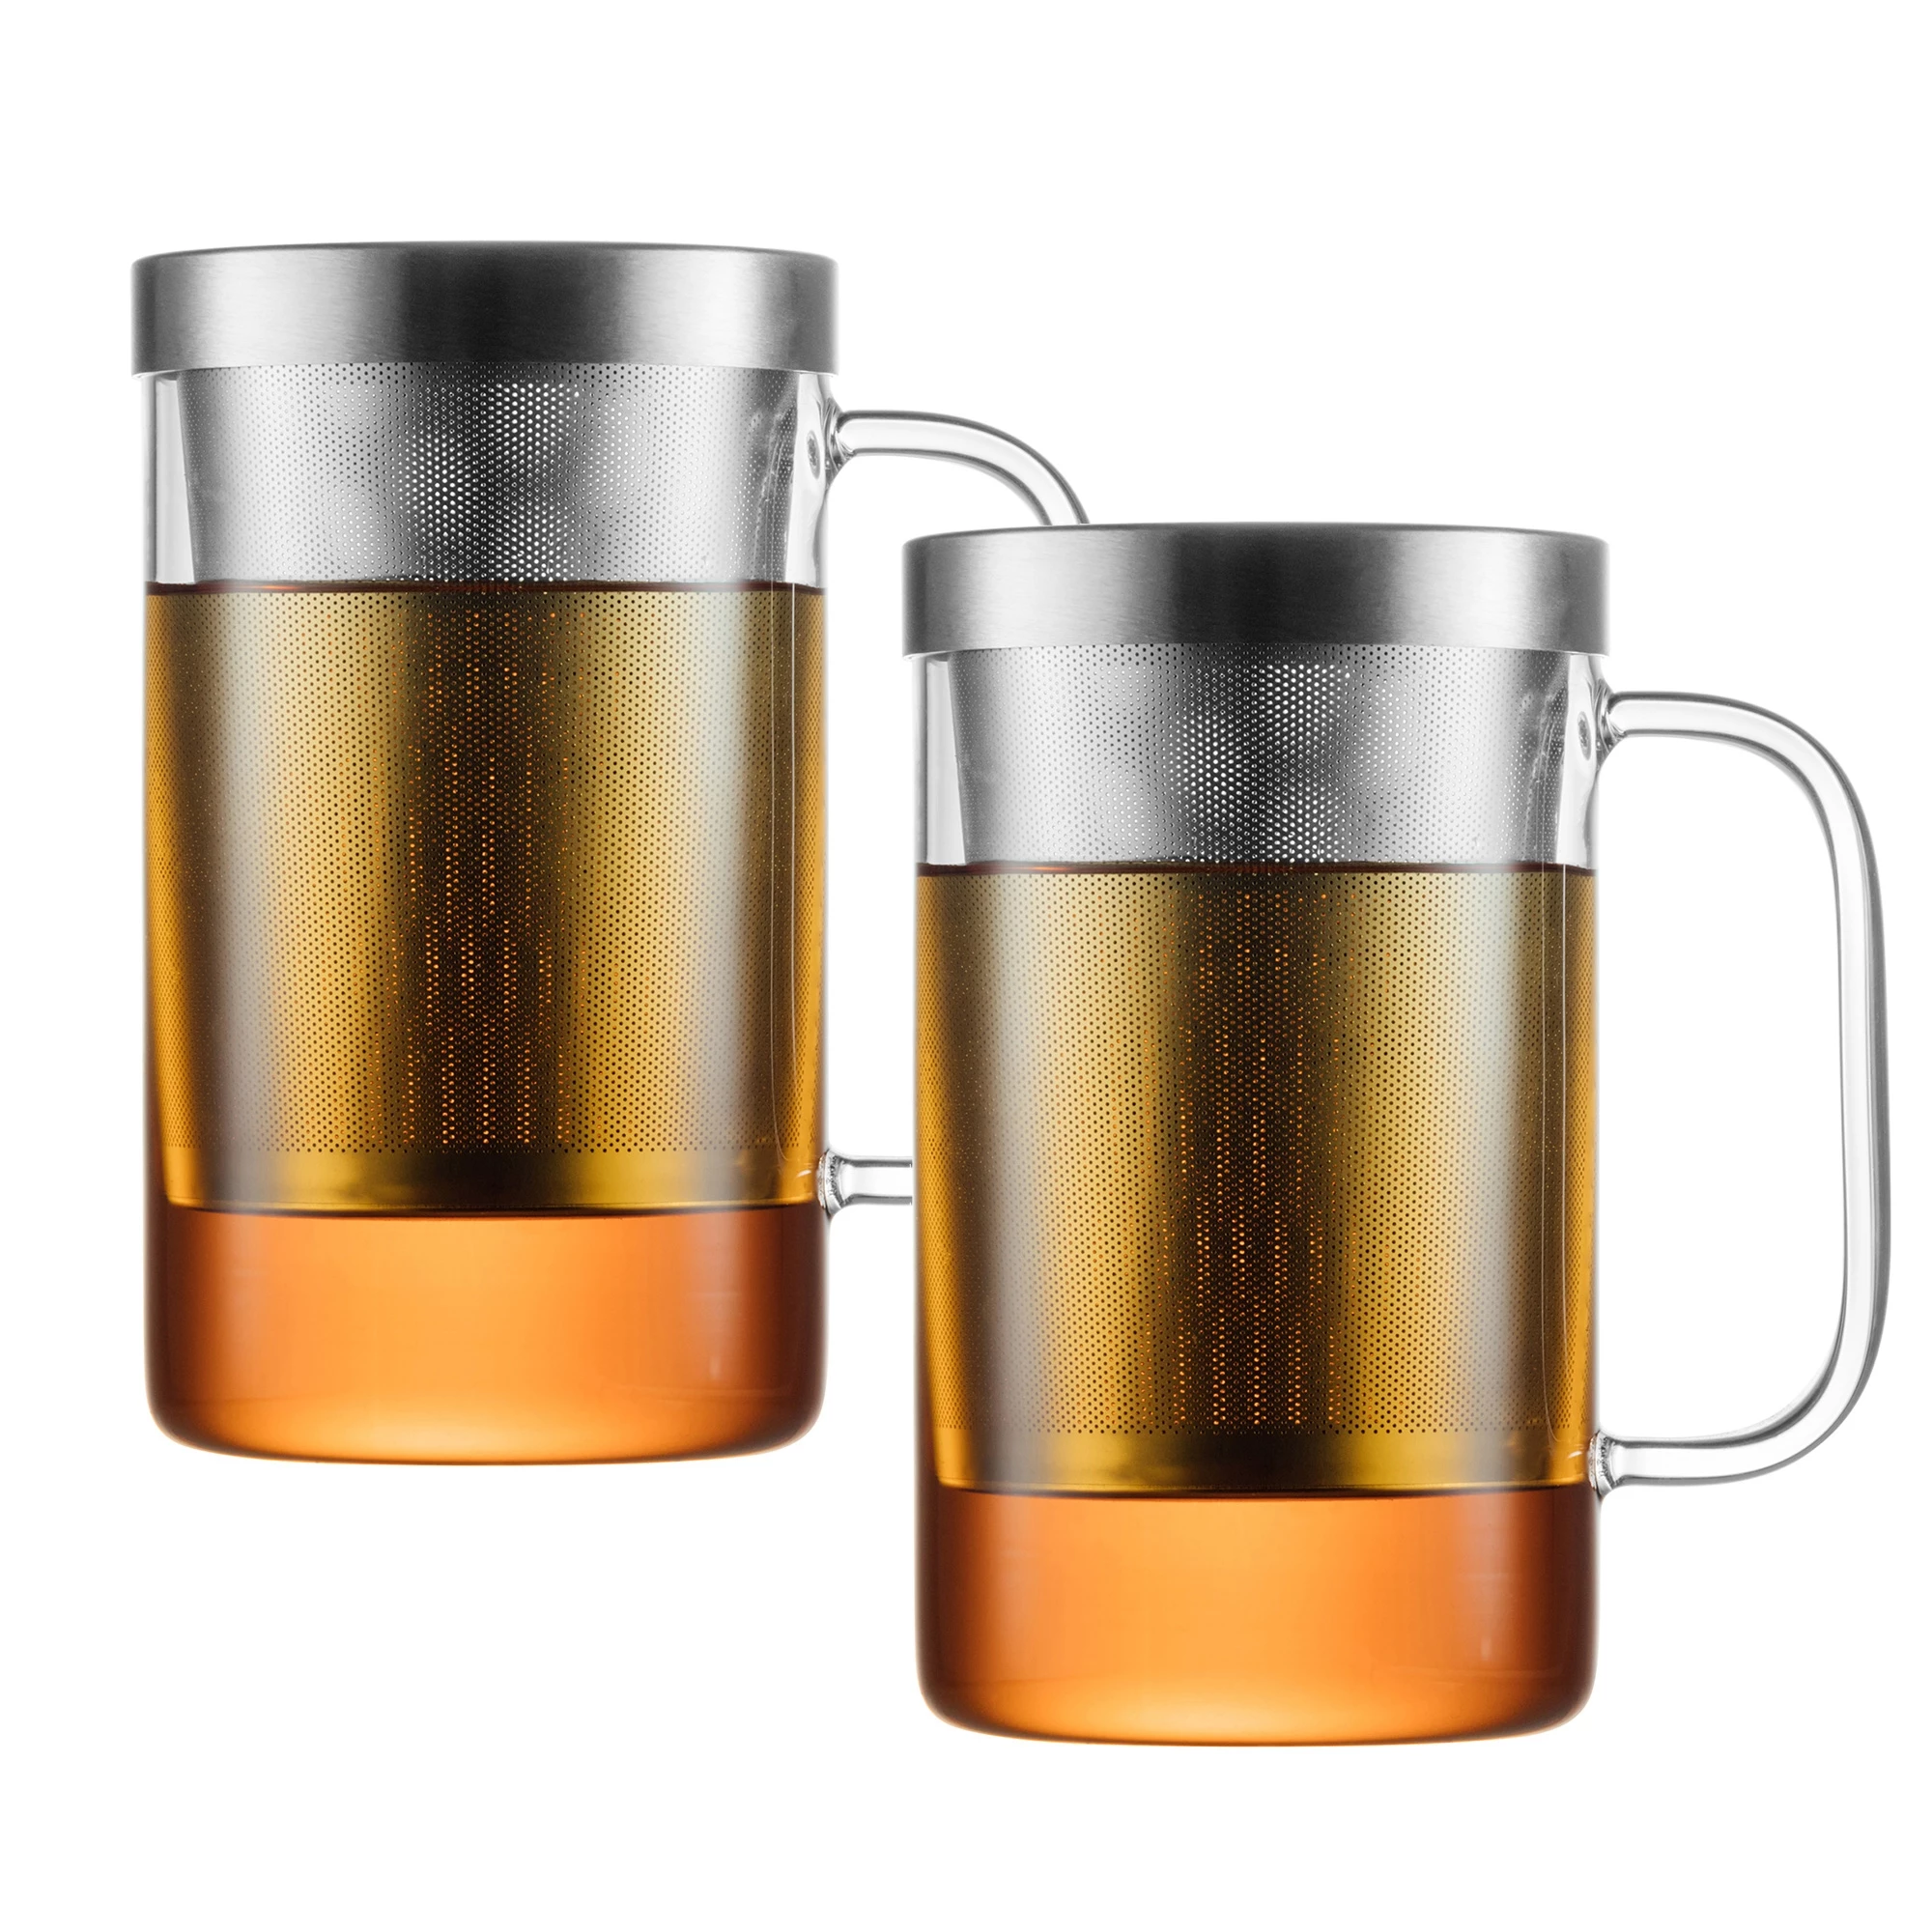 Large tea glass with 500 ml usable volume in a double pack, stainless steel strainer with 30-year warranty - GAIWAN® PURE550S x2